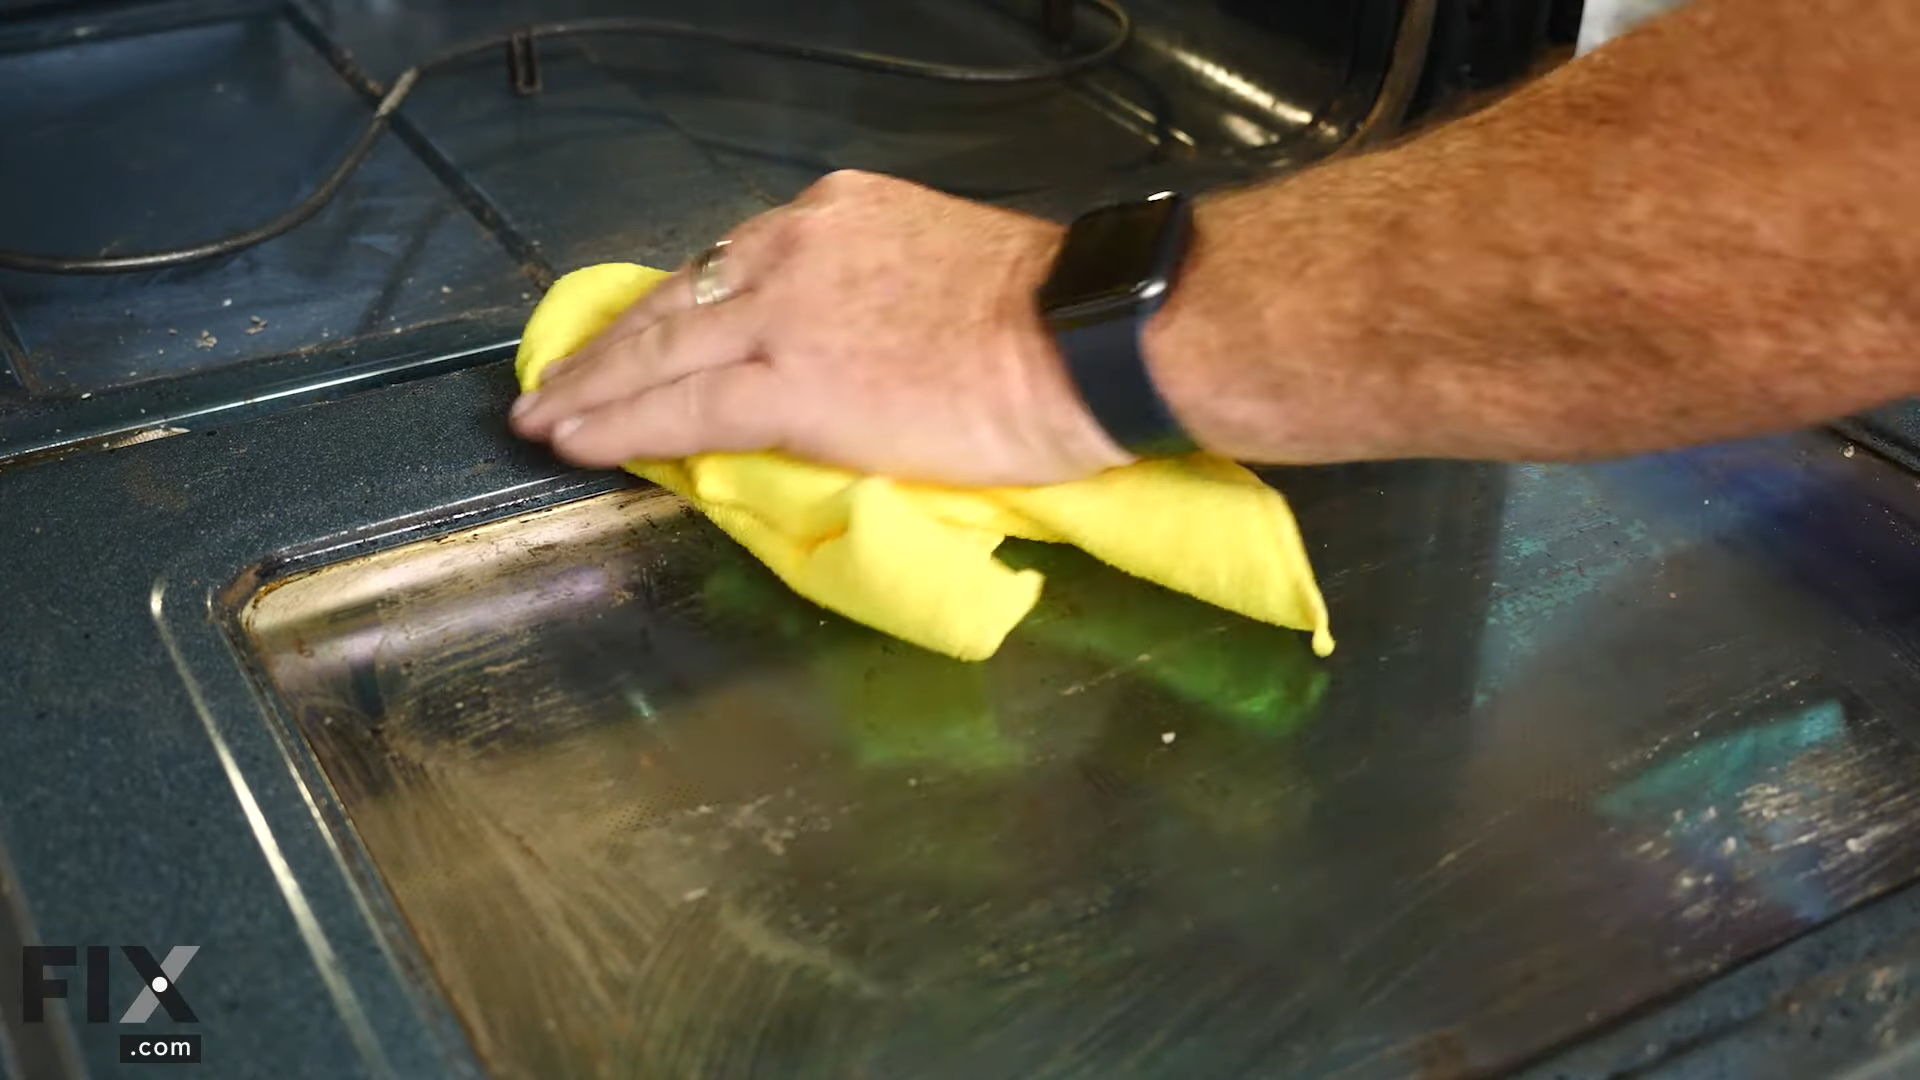 Cleaning an Oven's Interior by Wiping it Down